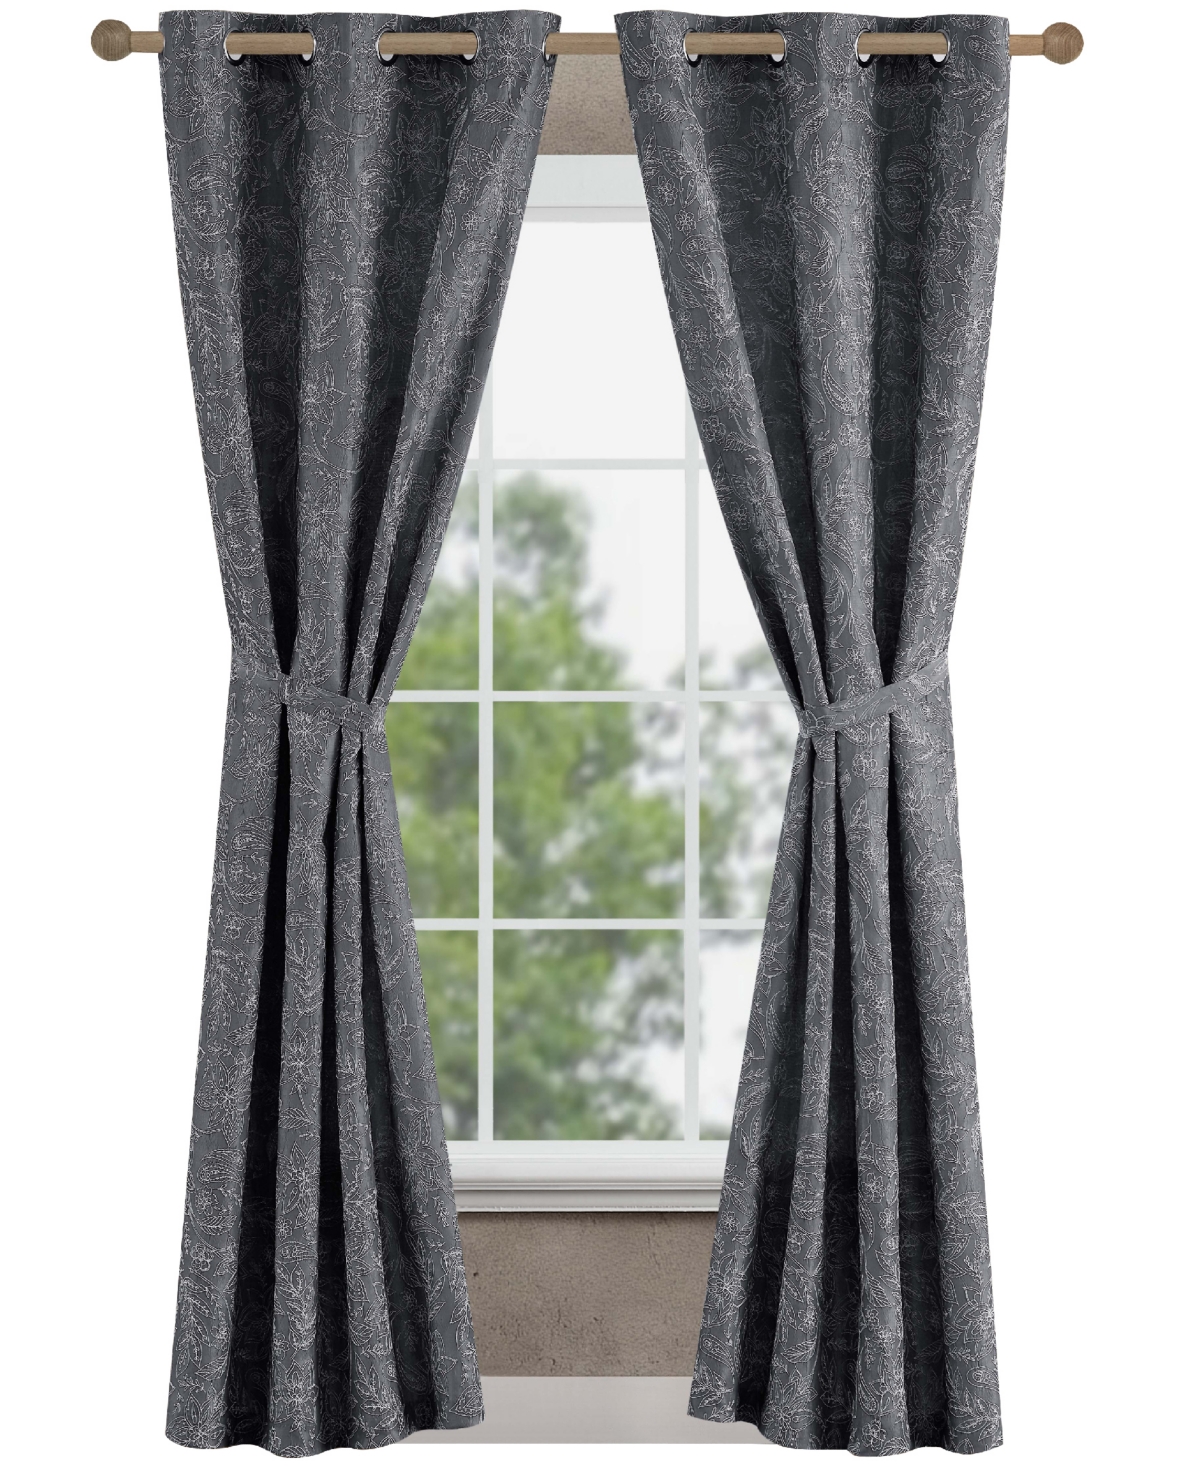 Jessica Simpson Groovy Paisley Textured Blackout Grommet Window Curtain Panel Pair With Tiebacks, 38" X 96" In Gray